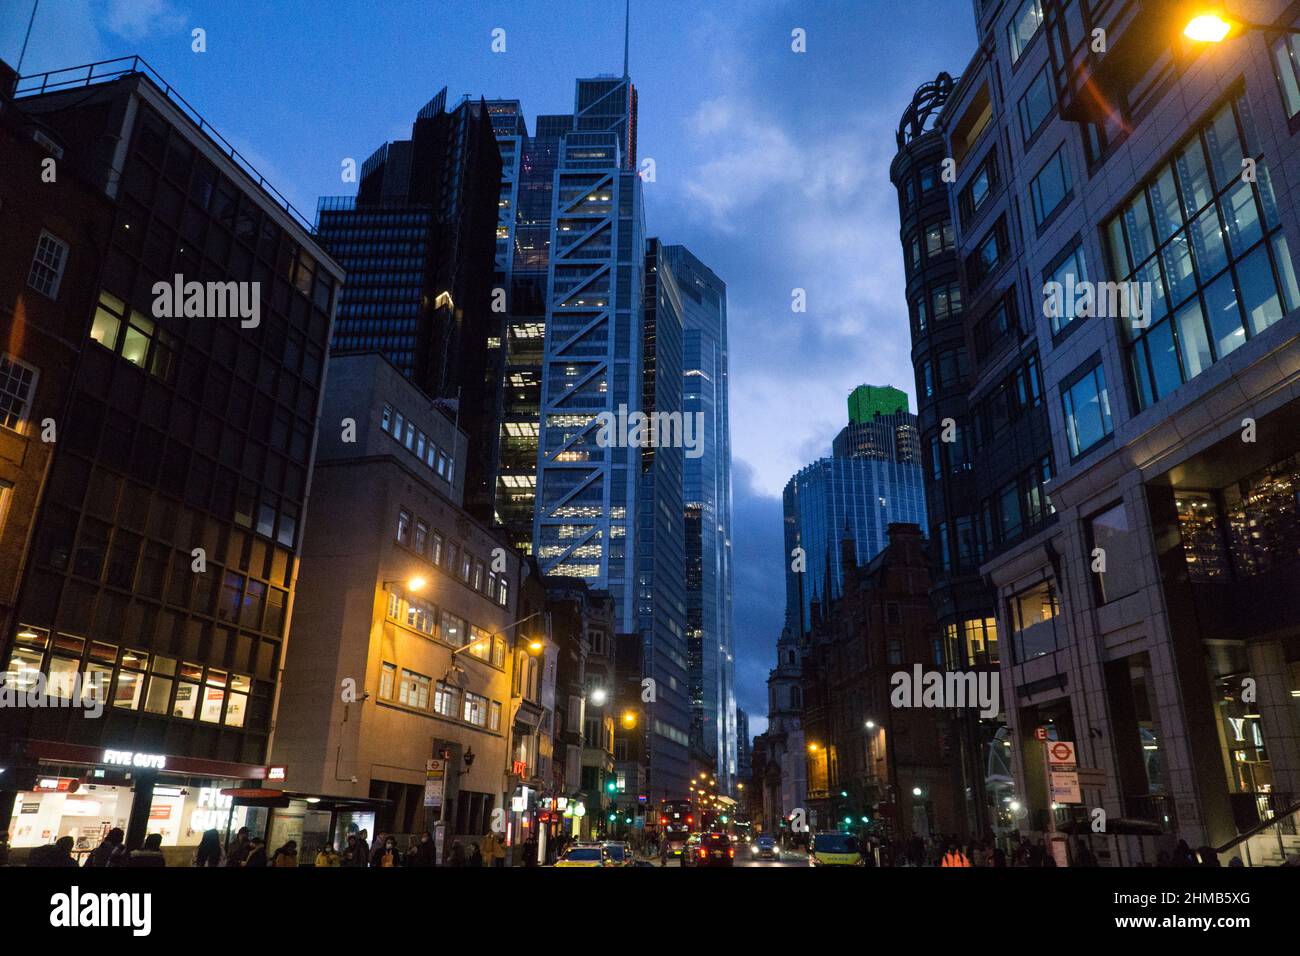 London, UK, 6 February 2022: Dusk views along Bishopsgate in the City of London, where buses and taxis bring people to Liverpool Street station. Anna Stock Photo